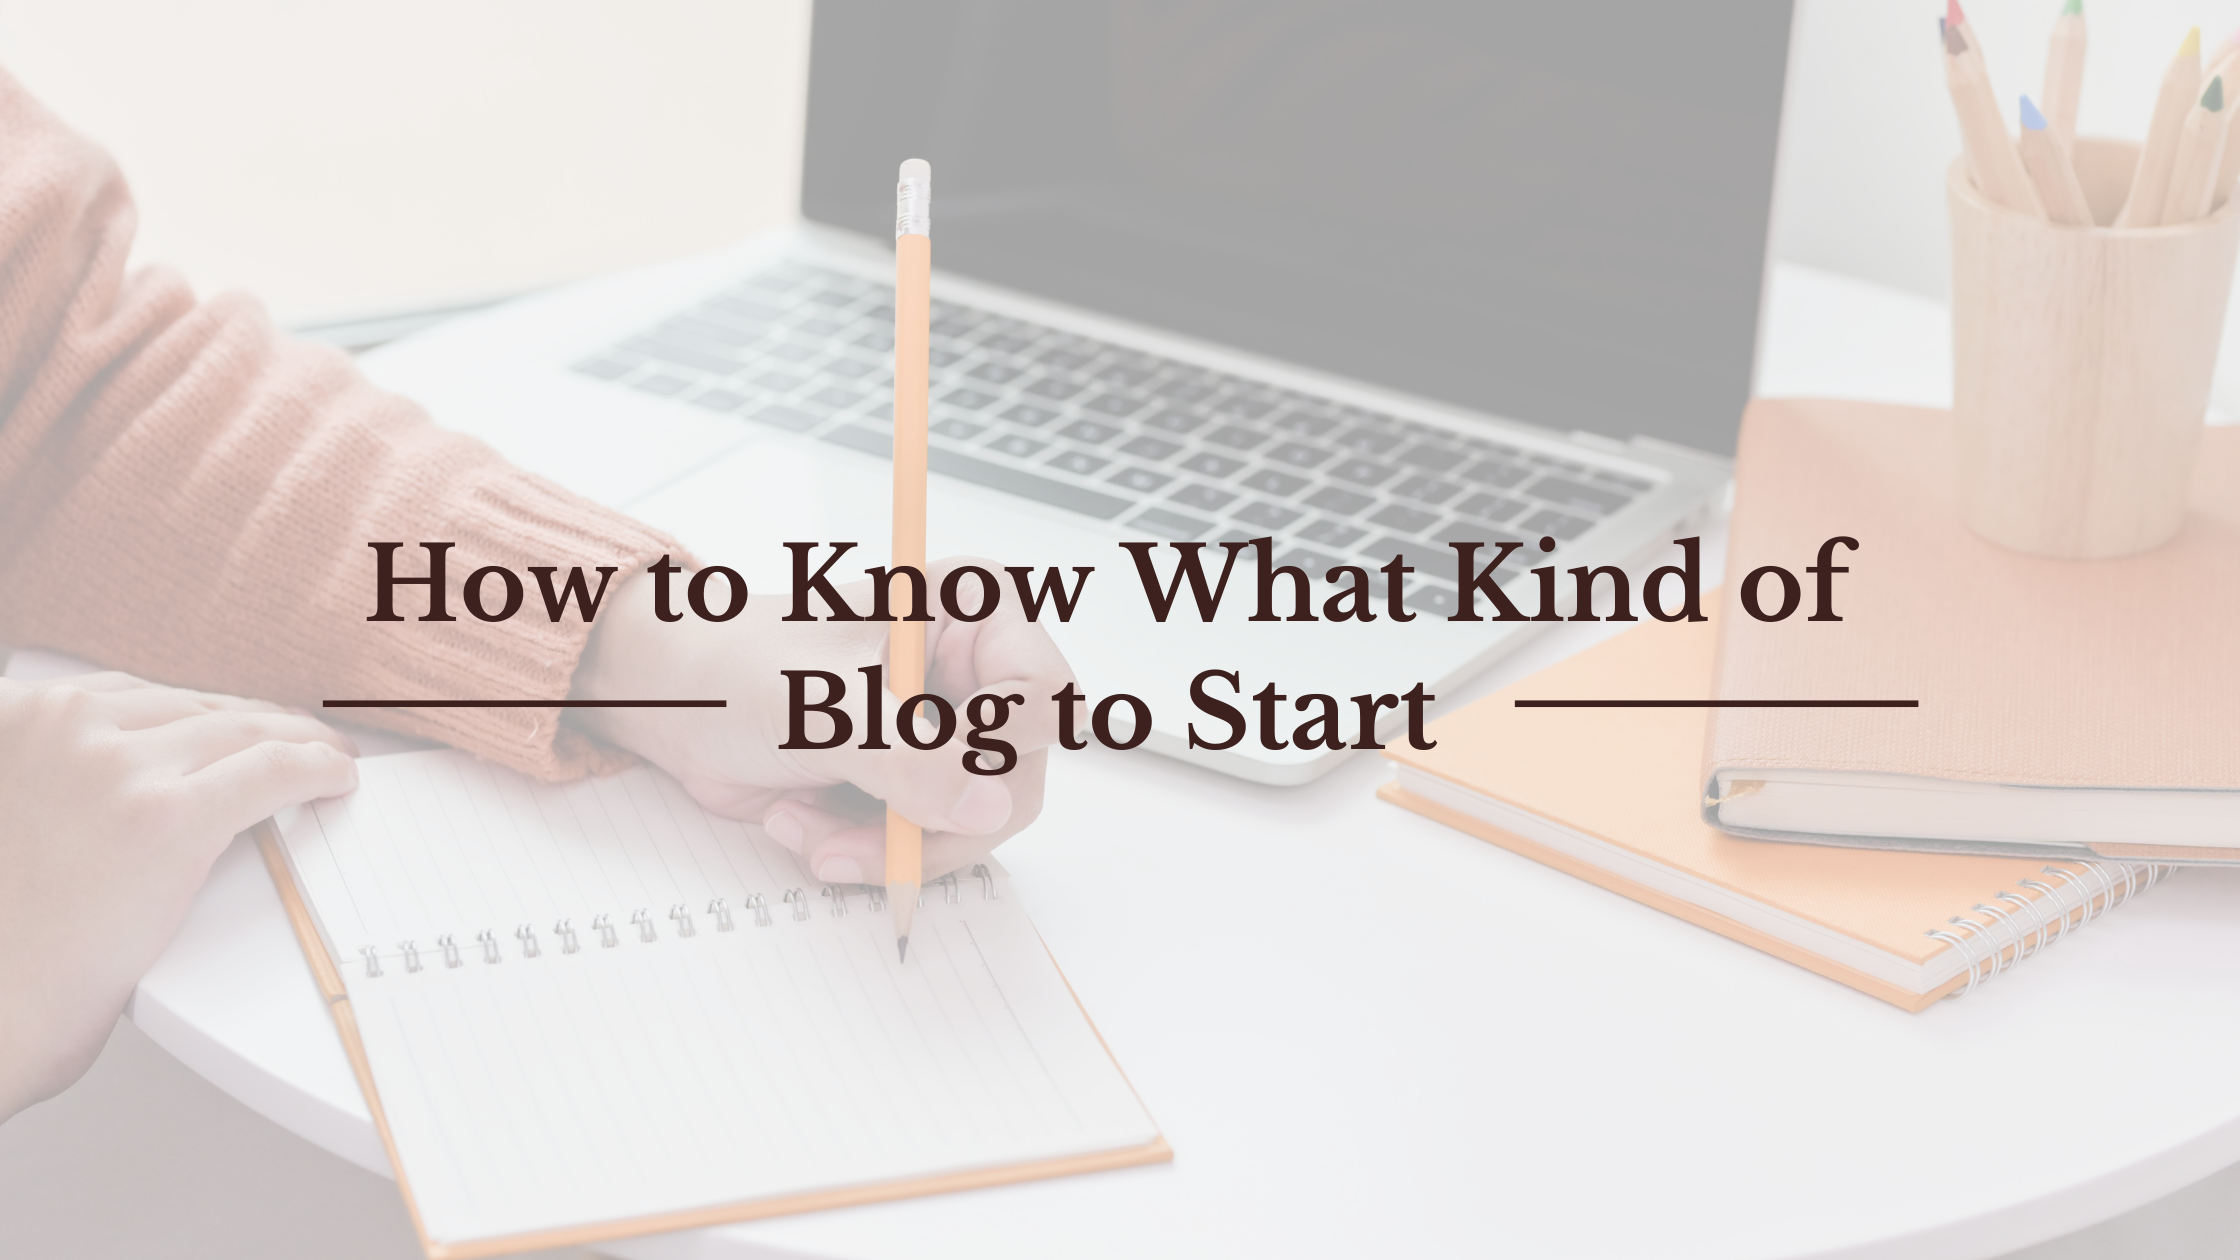 How To Know What Kind of Blog I Should Start